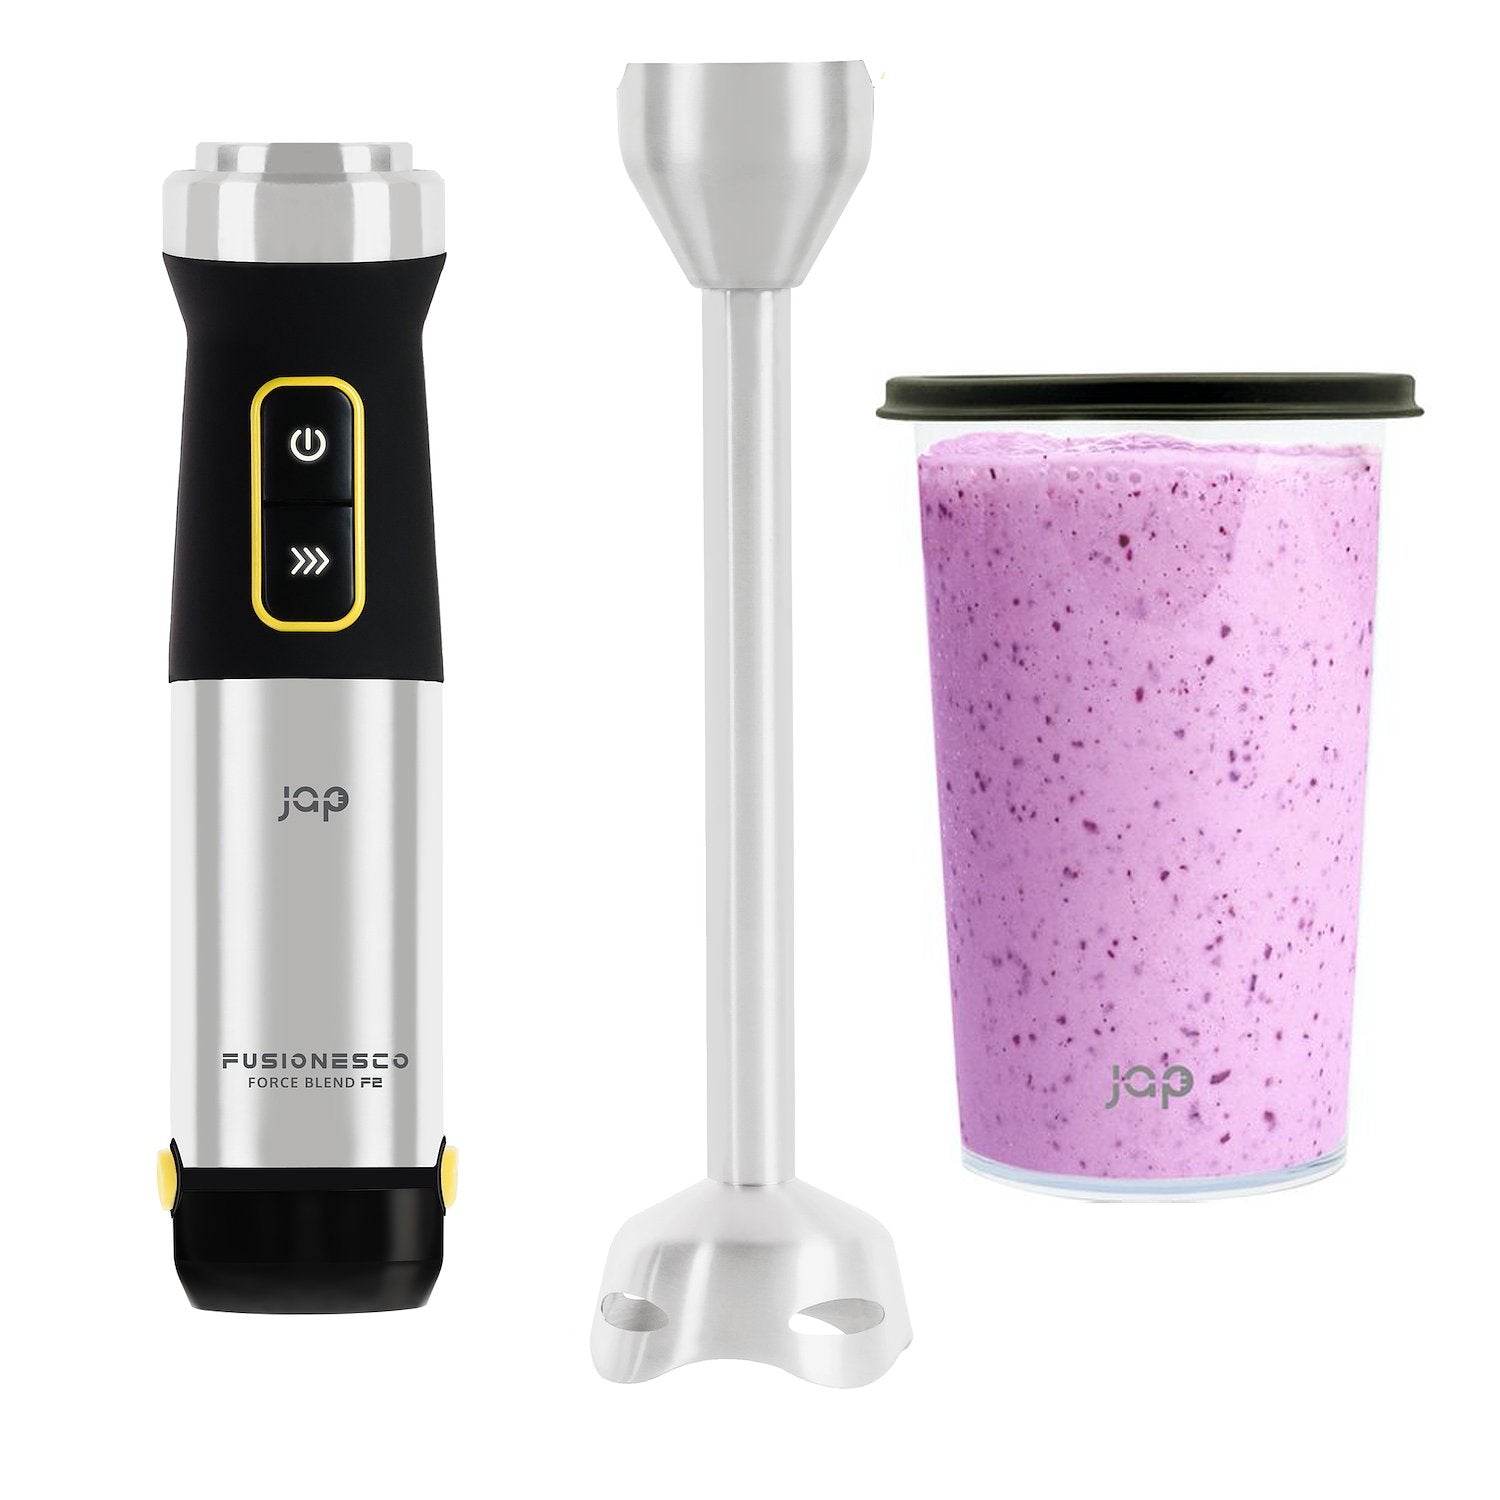 JAP ForceBlend F1 - Hand Blender Set - 21 Speeds and Turbo - Extra Powerful 1200W